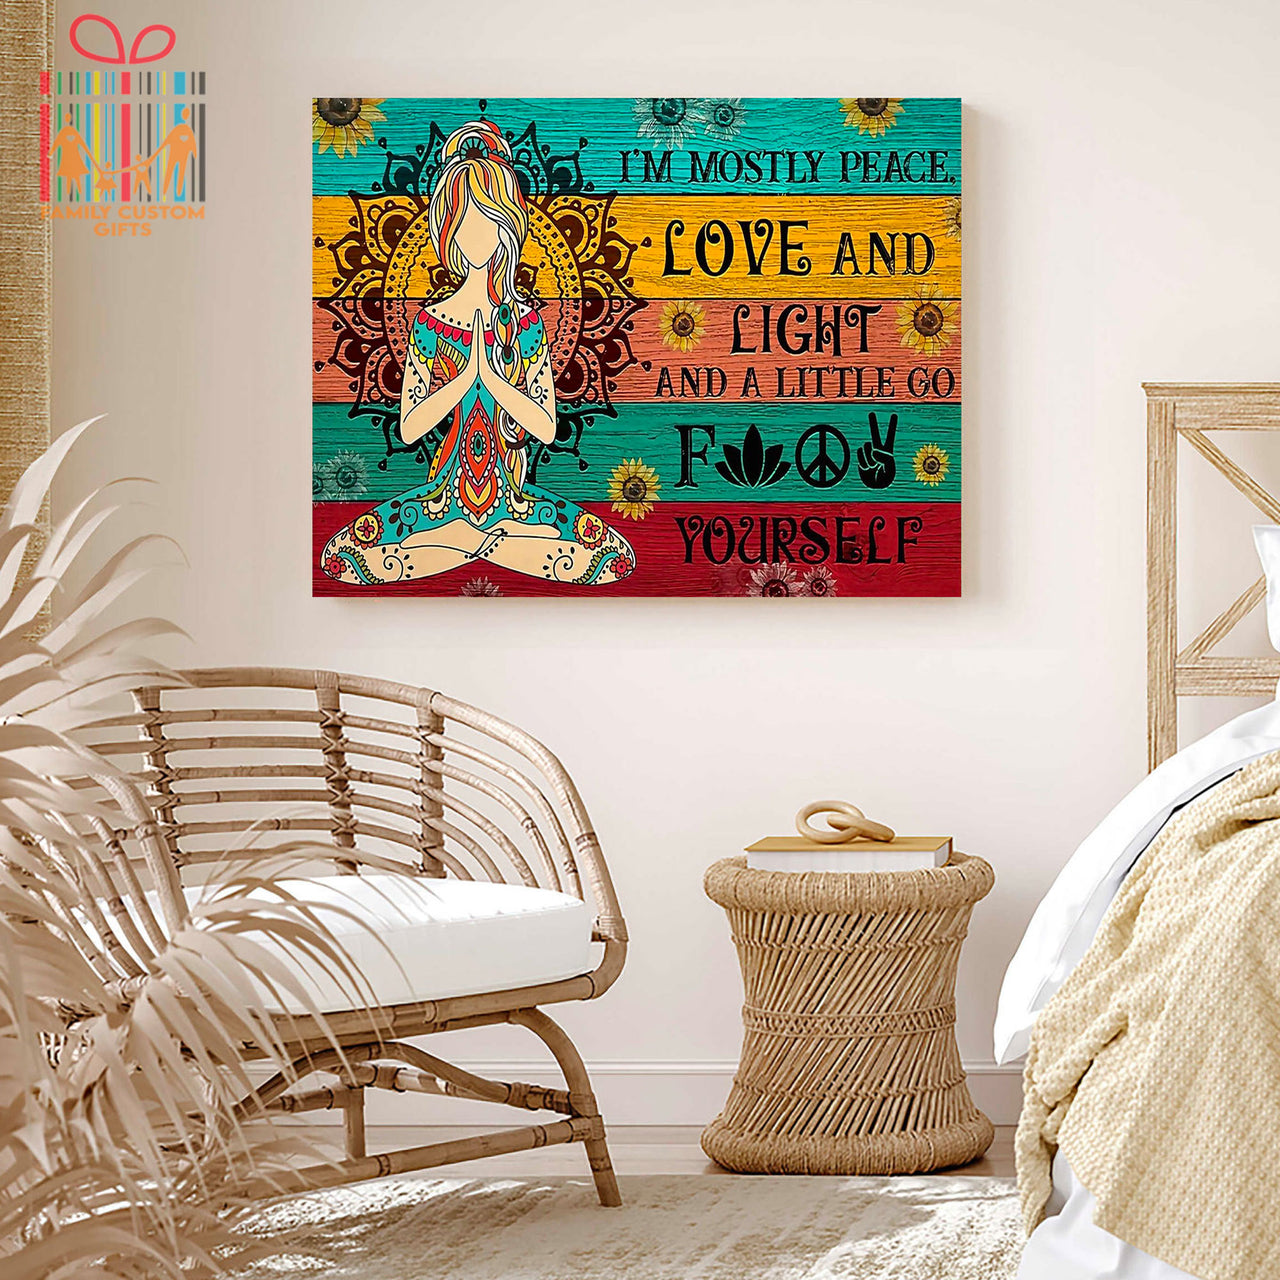 Custom Poster Prints Wall Art I'm Mostly Peace Love and Light A Little Go Personalized Gifts Wall Decor - Gift for Girl